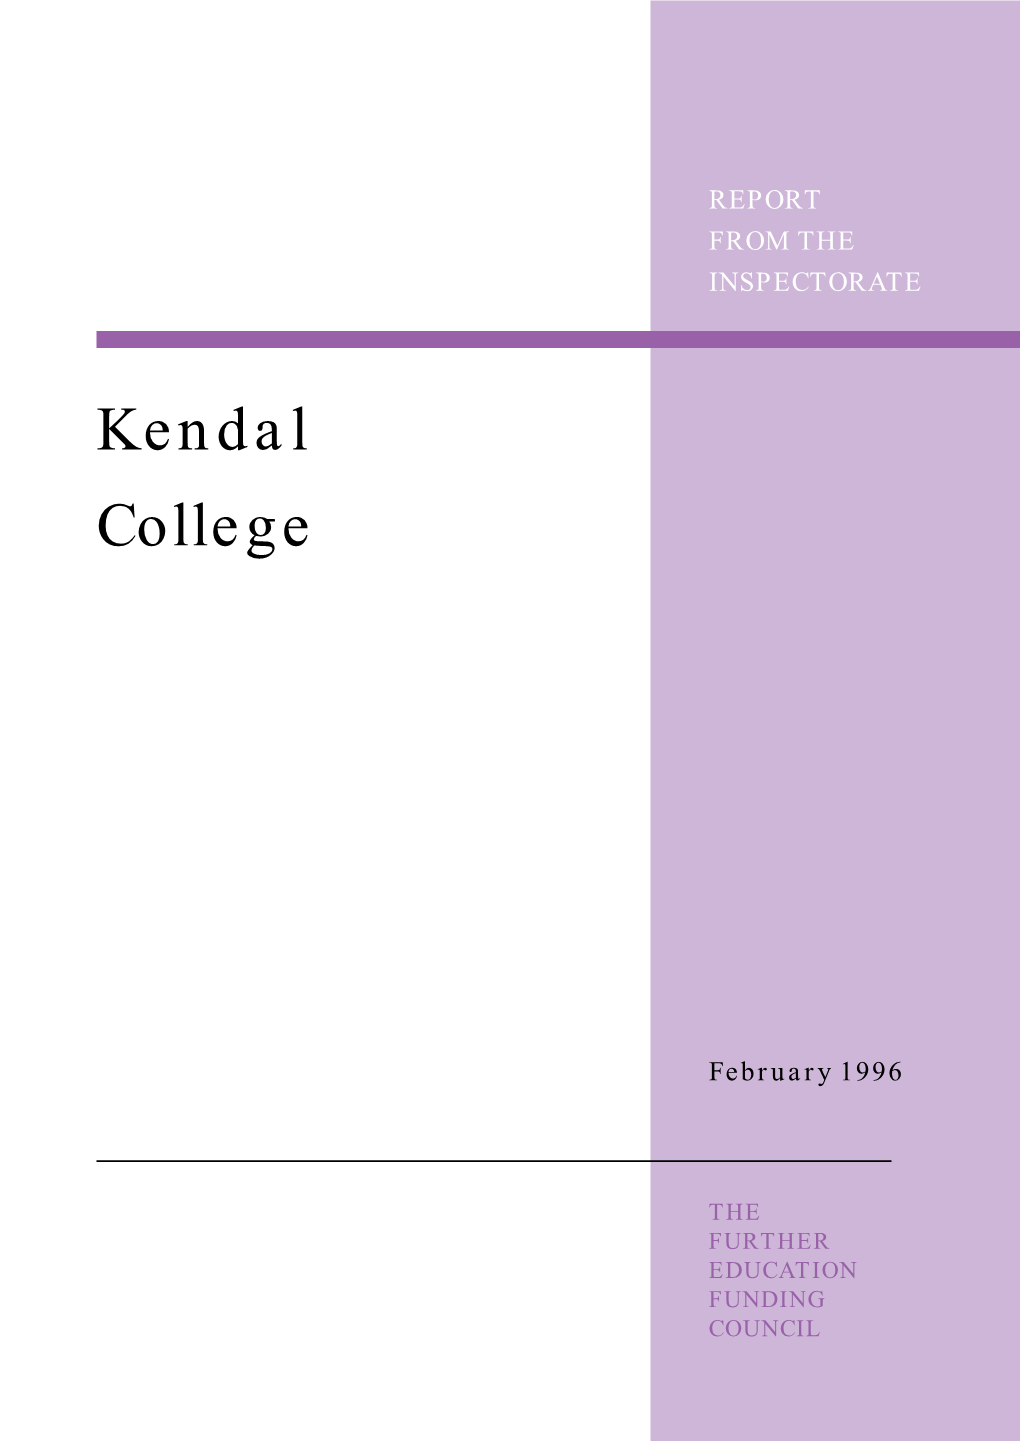 Kendal College